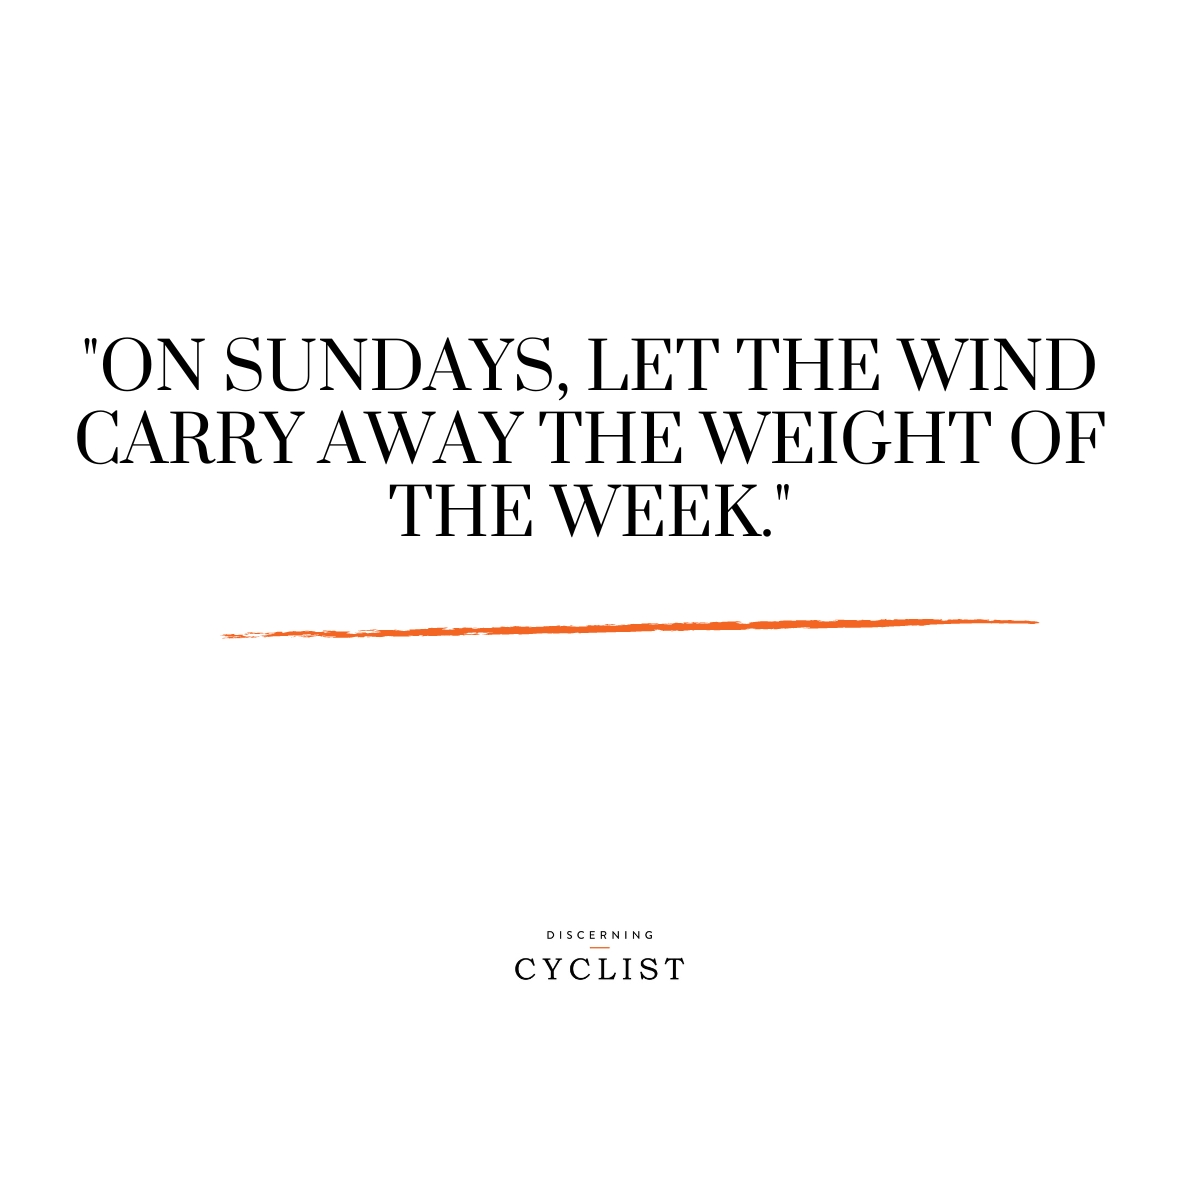 "On Sundays, let the wind carry away the weight of the week."